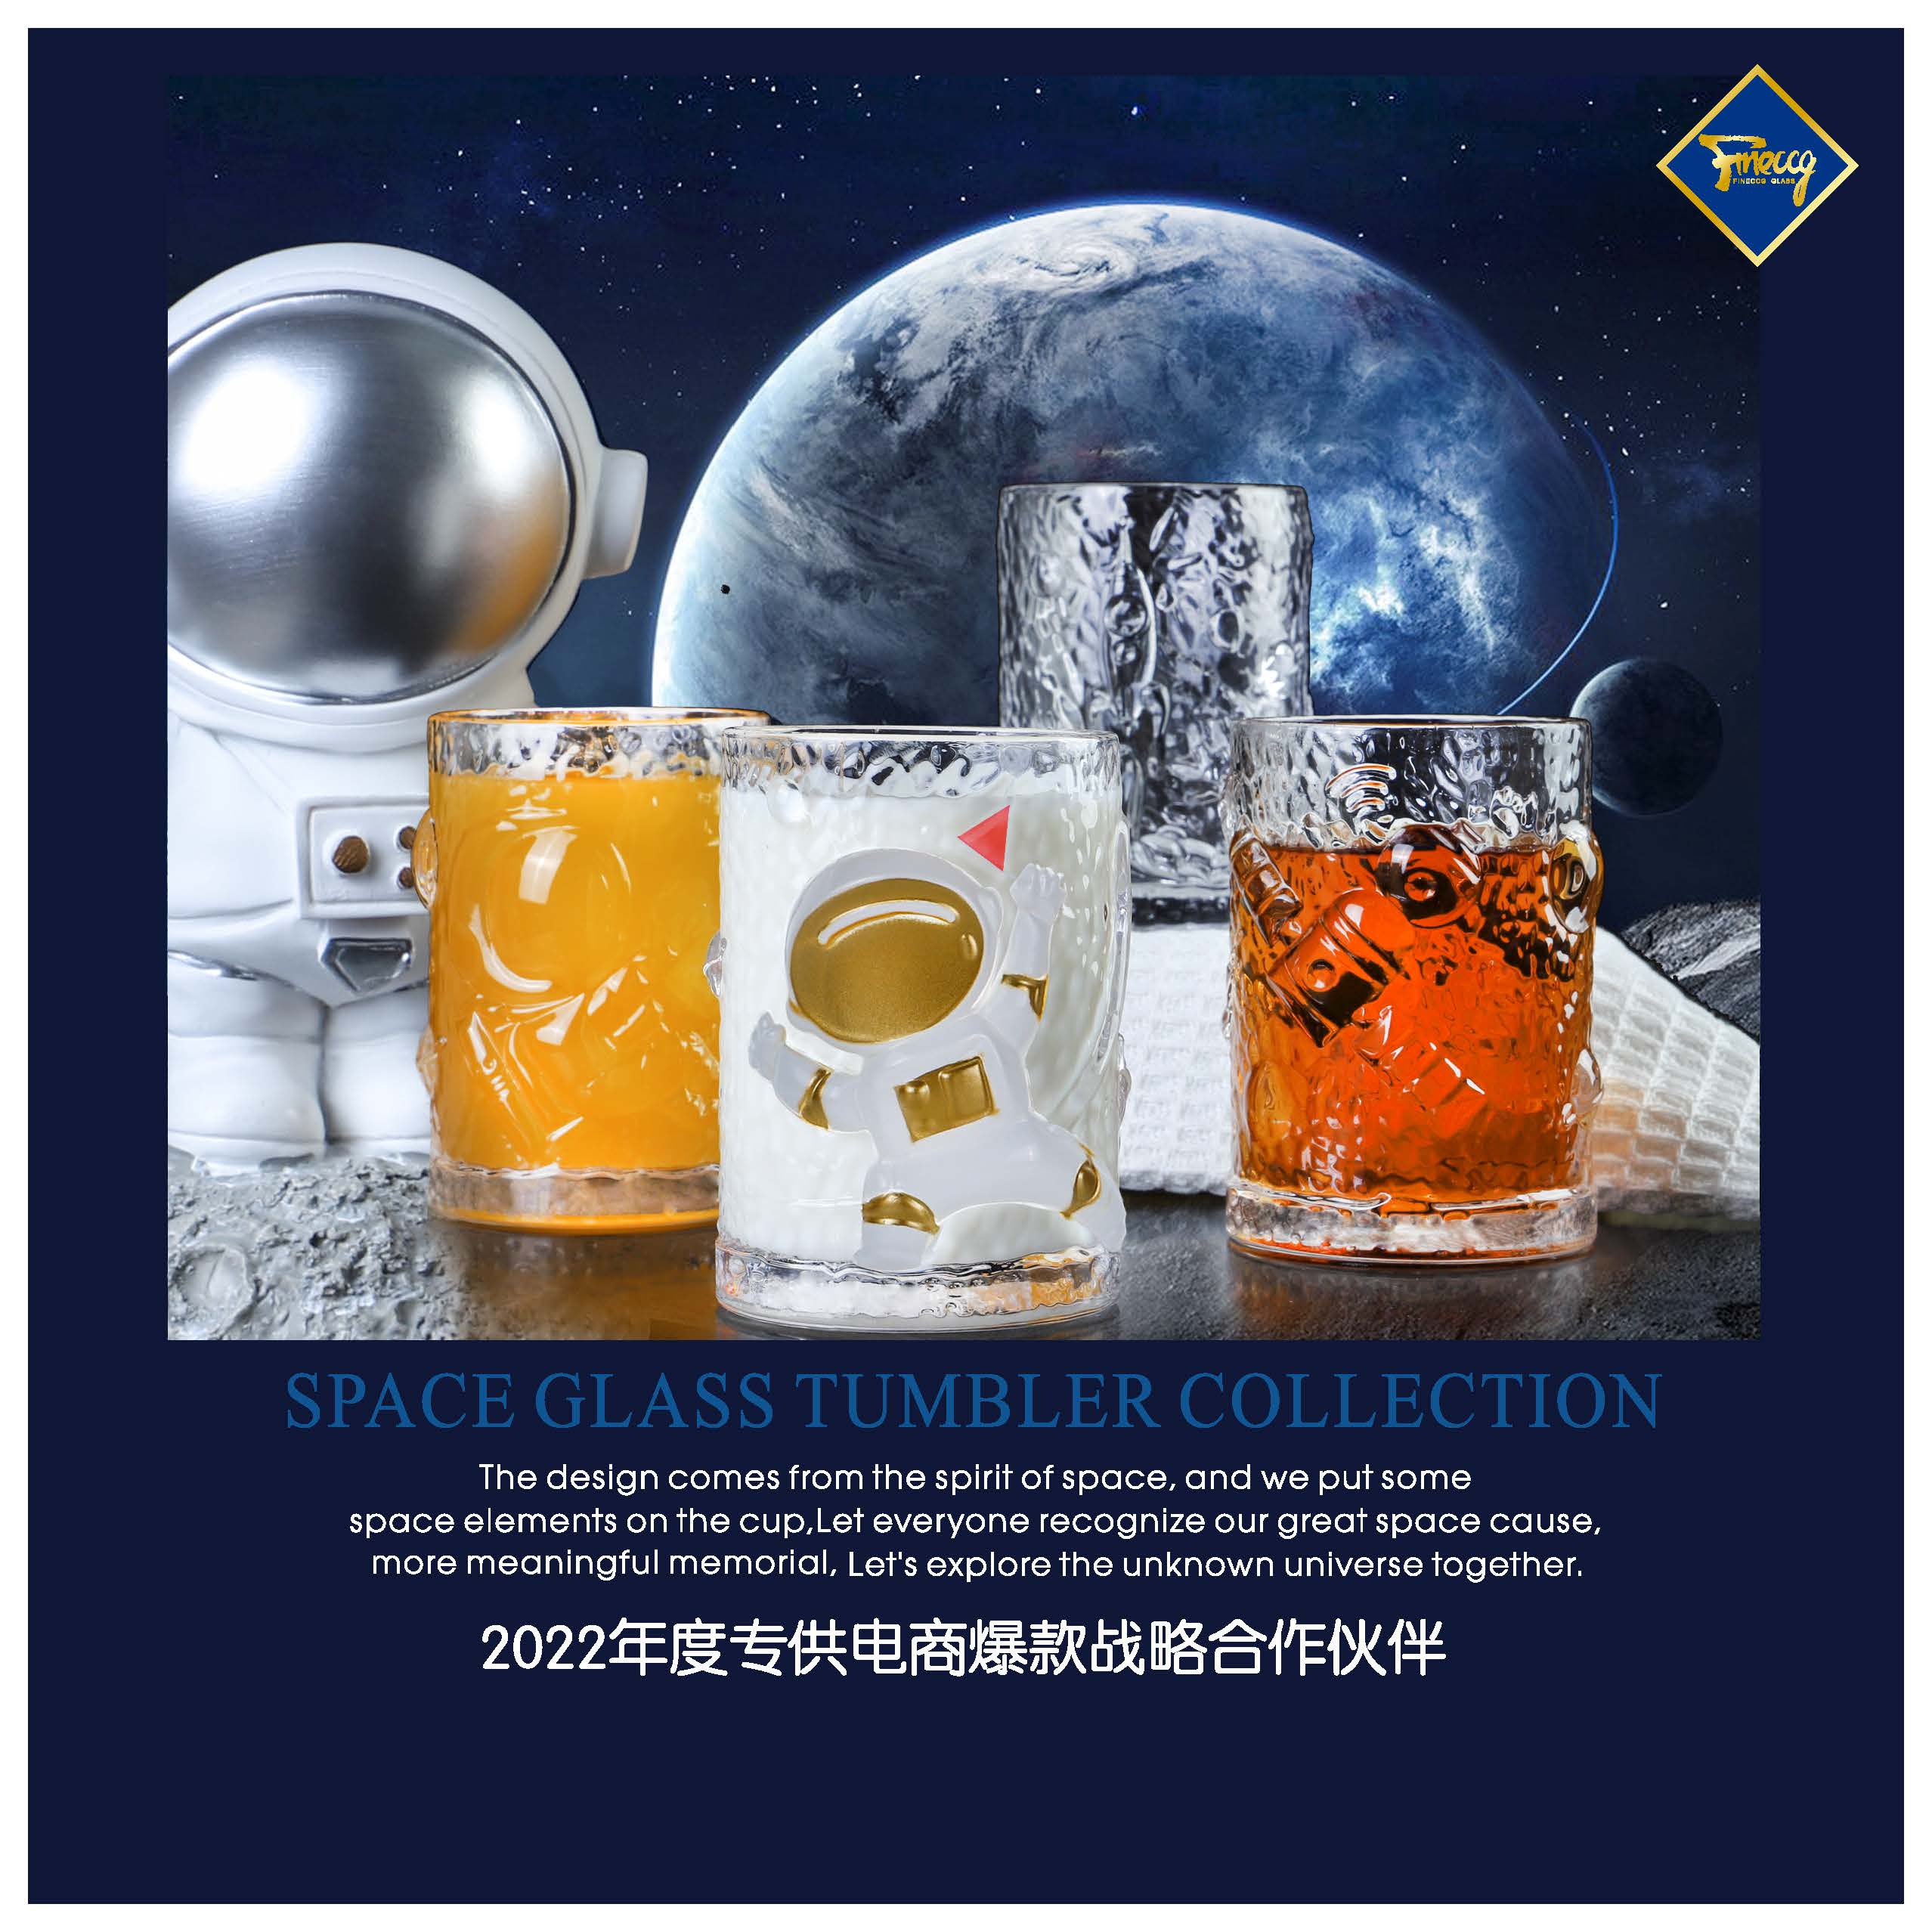 SPACE GLASS TUMBLER COLLECTION